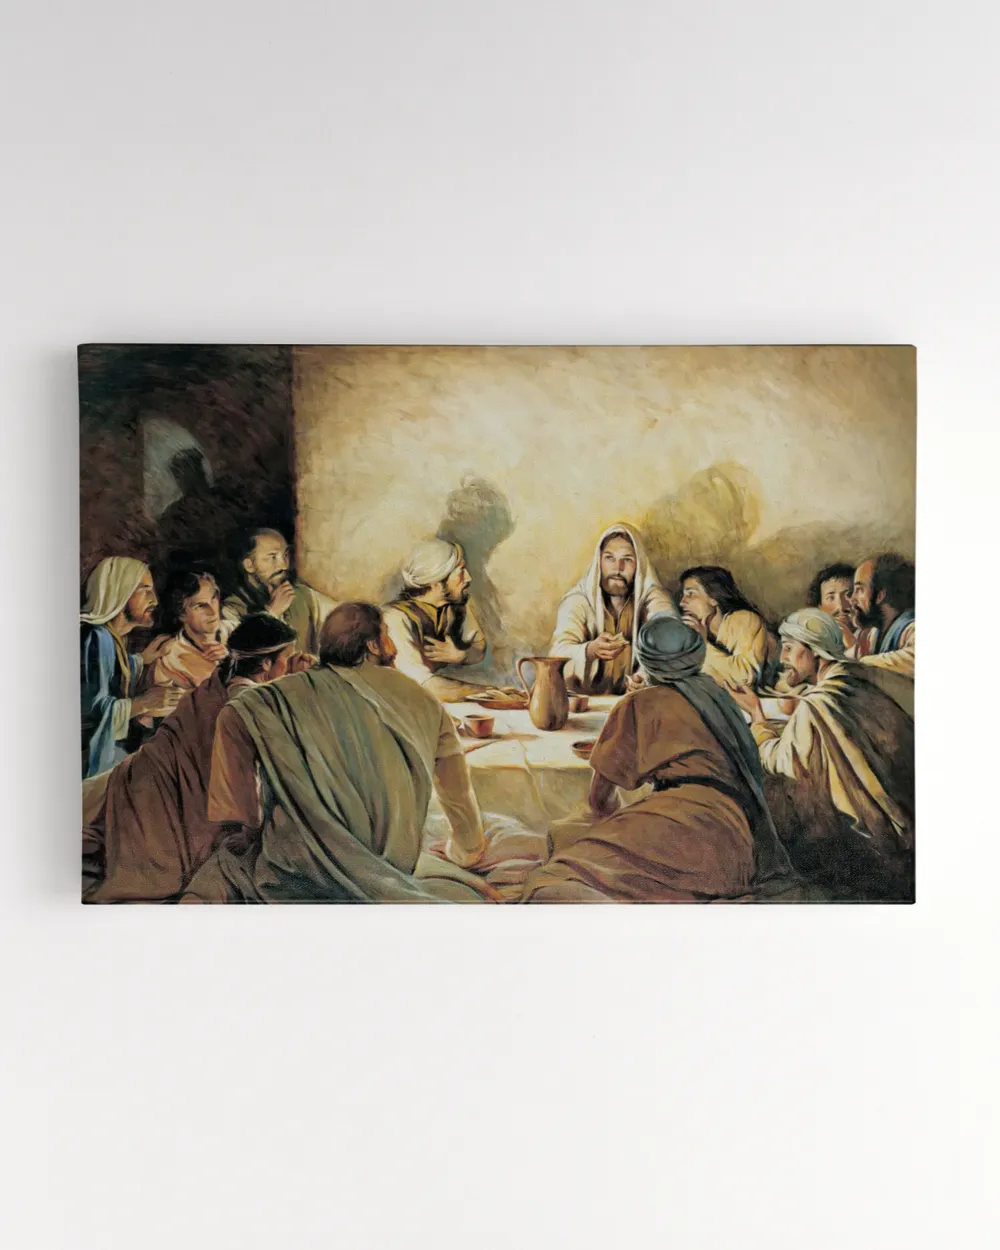 Last Supper Wall Art 8 - Last Supper Wall Decor - Best Wrapped Canvas For Dining Room - Jesus Canvas